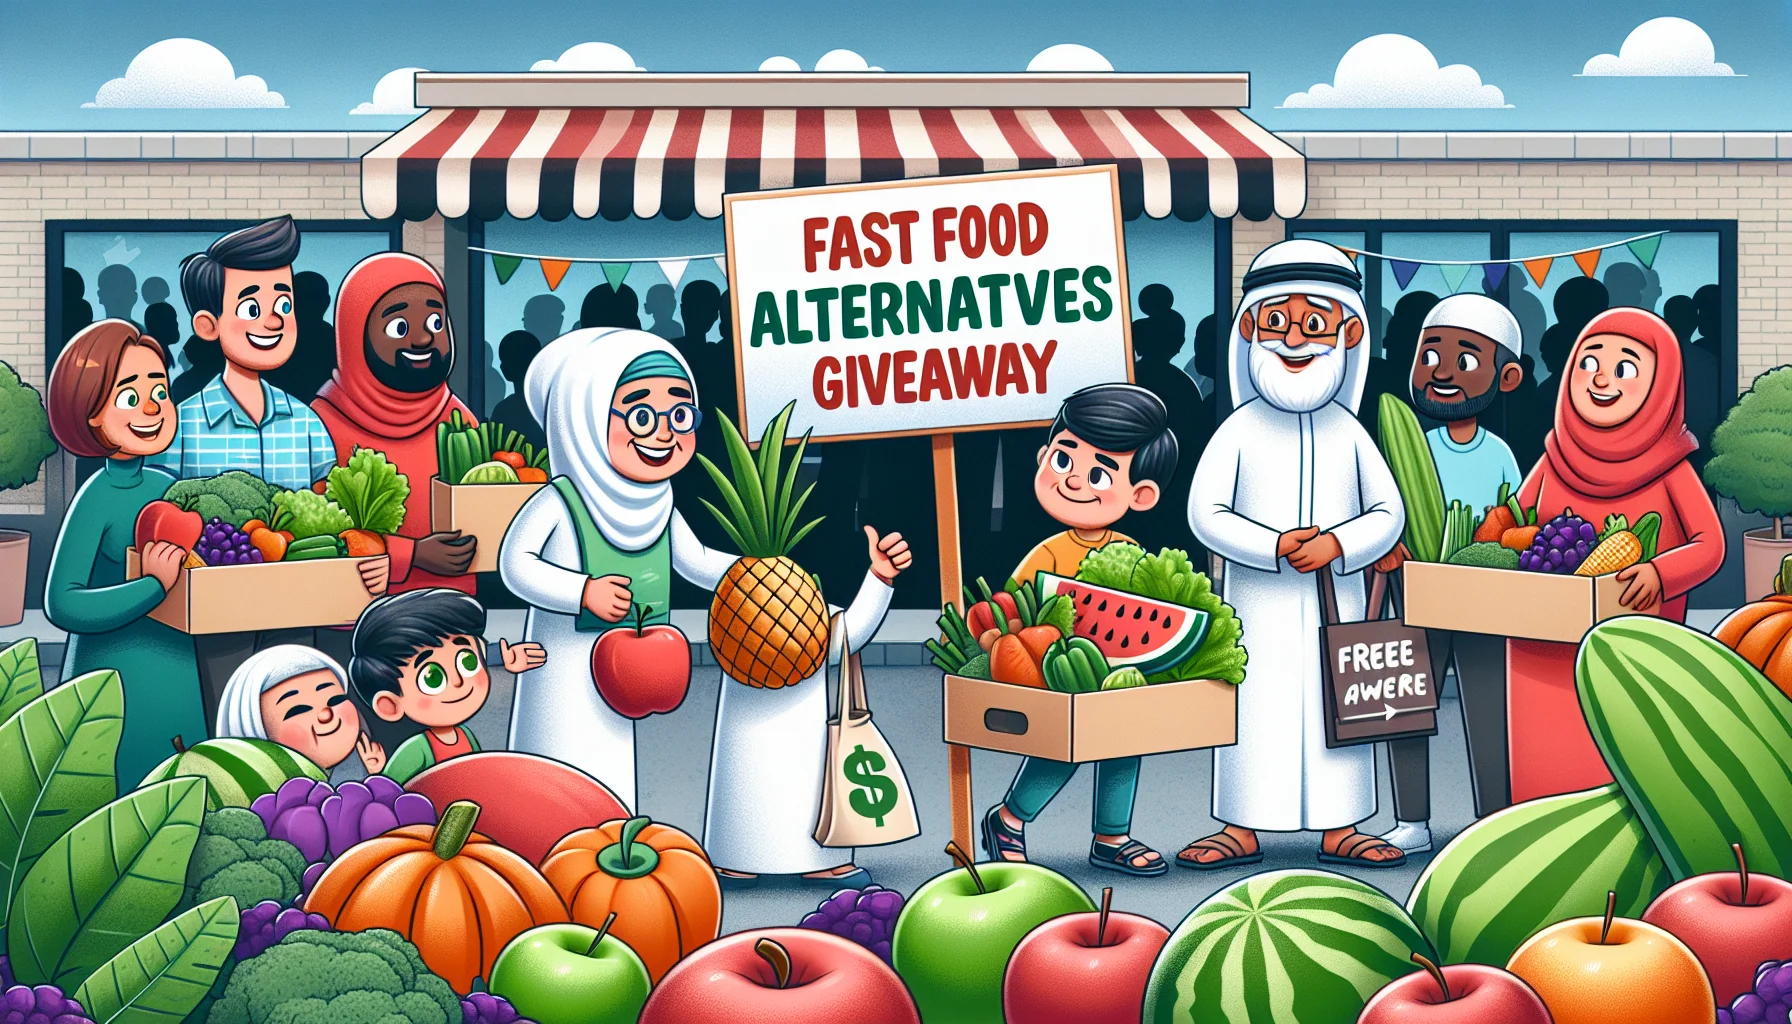 Design a playful and engaging image representing a 'Fast Food Alternatives Giveaway'. Show a comical scene where various vegetables and fruits are carrying banners and placards promoting the benefits of healthy eating. Include a signboard displaying the significantly lower costs of these healthy foods compared to fast food. To create an enticing environment, backdrop the scene with a local market bustling with diverse people - a Middle-Eastern woman comparing apples, a South Asian man perusing leafy greens, a Caucasian child excitedly pointing at a watermelon, and a Black senior man happily bagging some oranges.